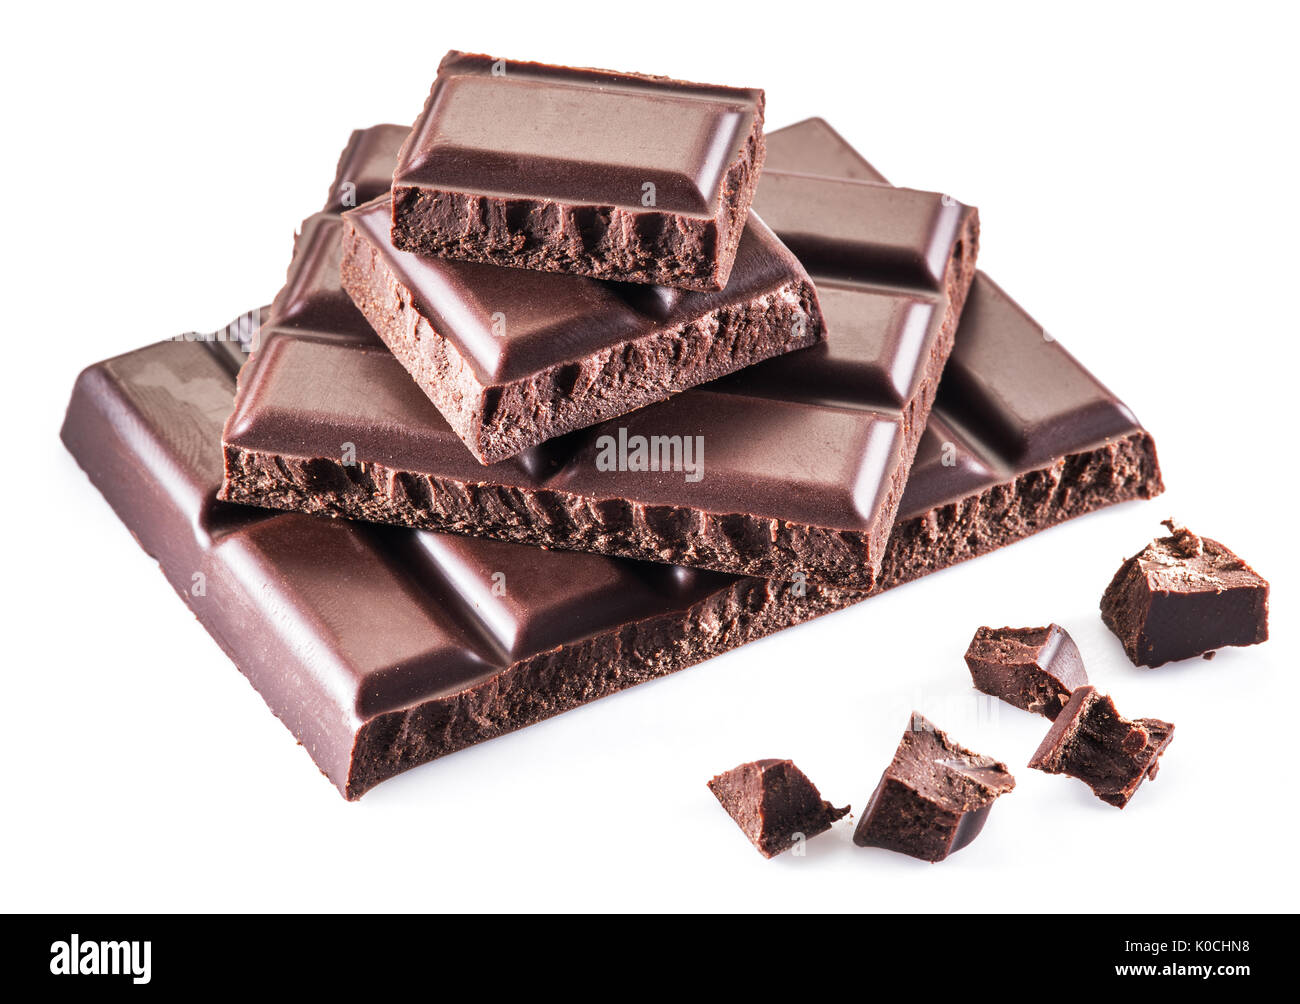 Pieces of chocolate bar isolated on a white background. Stock Photo